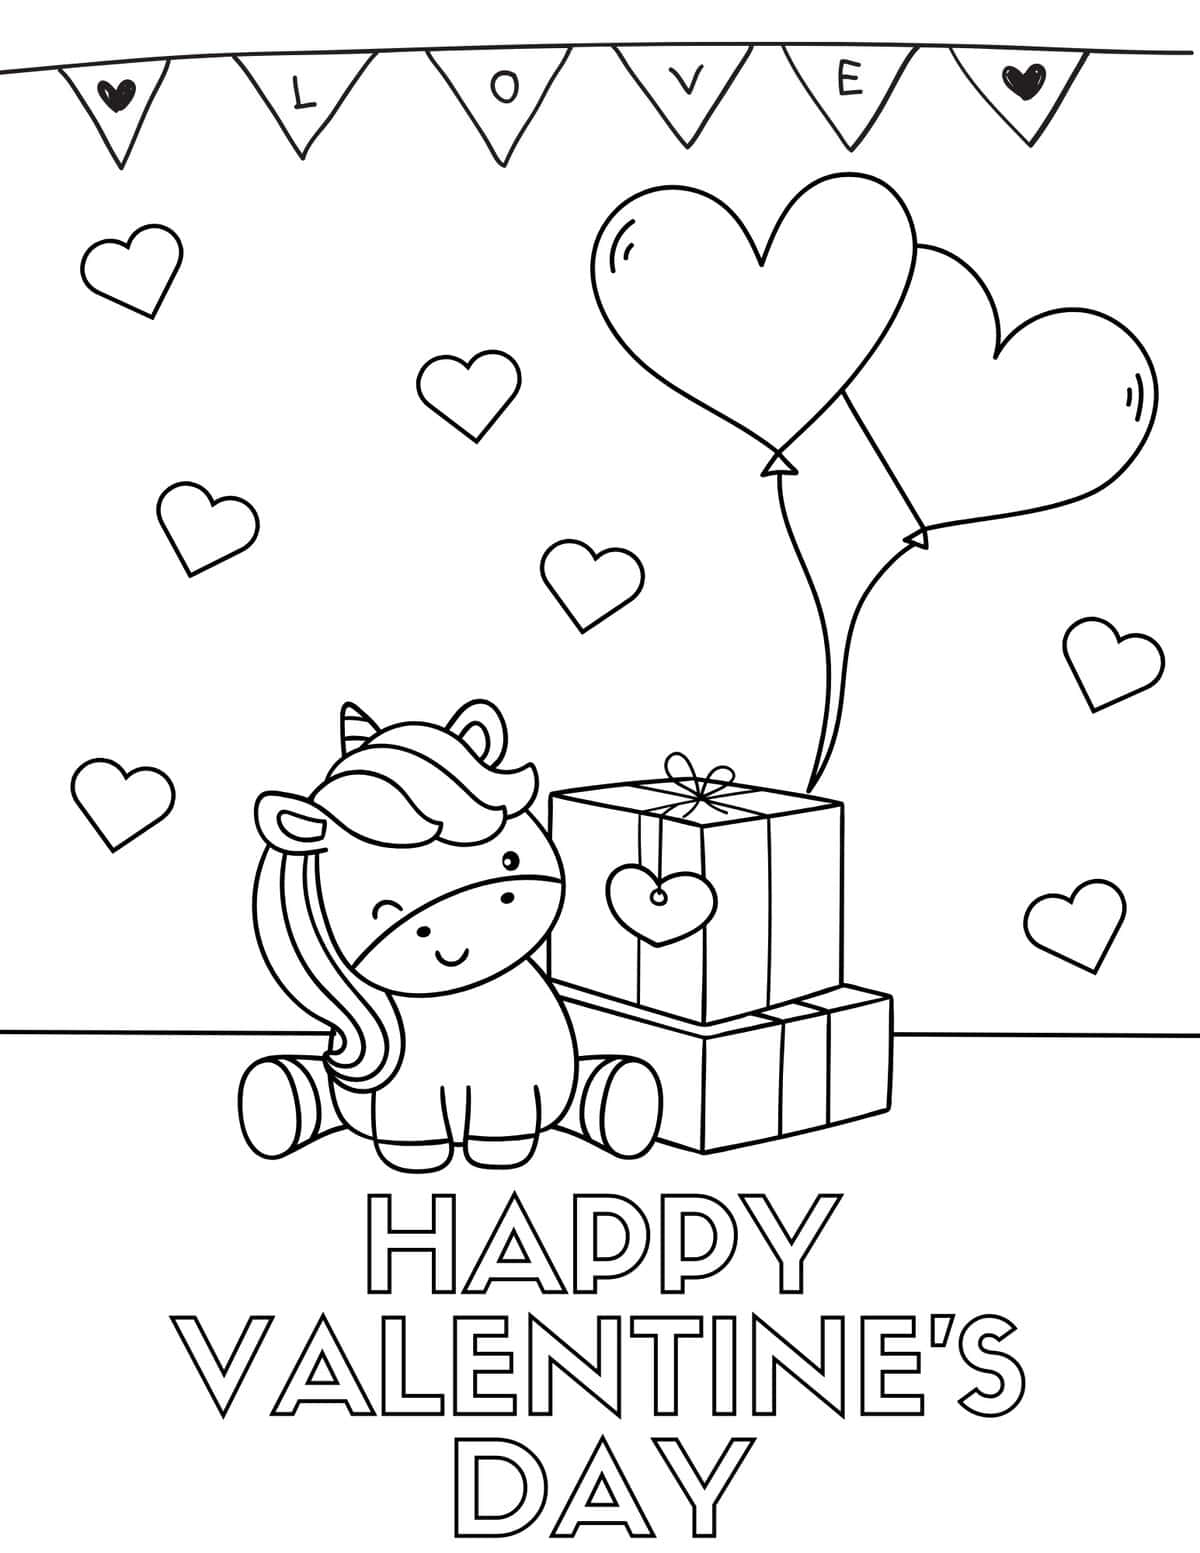 Afro Unicorn Valentines with Pencils, 12ct | Greeting Cards | CVS